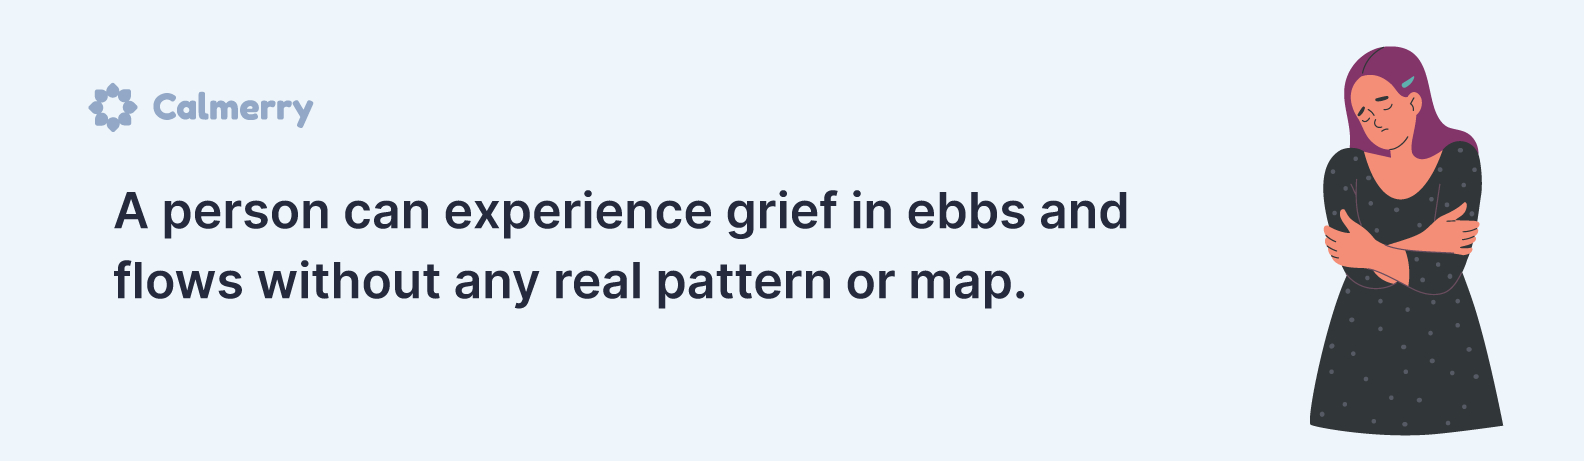 A person can experience grief without any real pattern or map